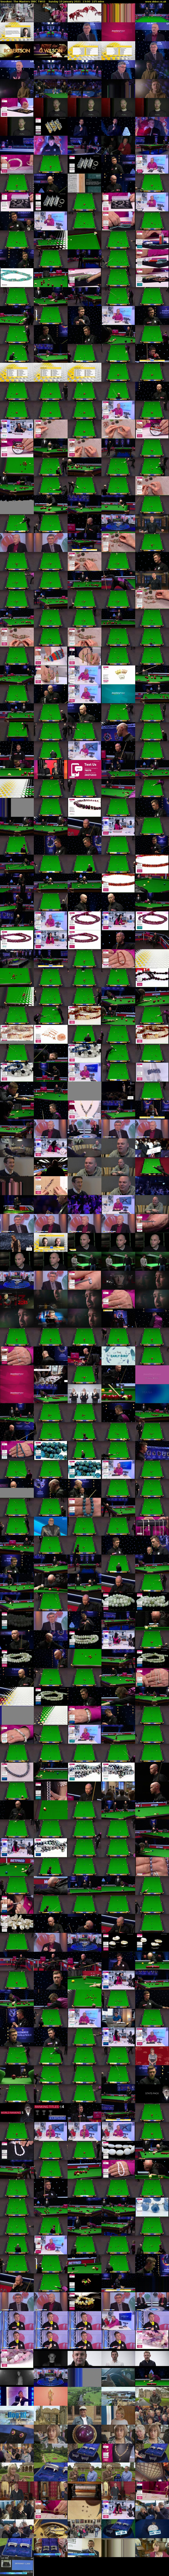 Snooker: The Masters (BBC TWO) Sunday 10 January 2021 13:00 - 16:45